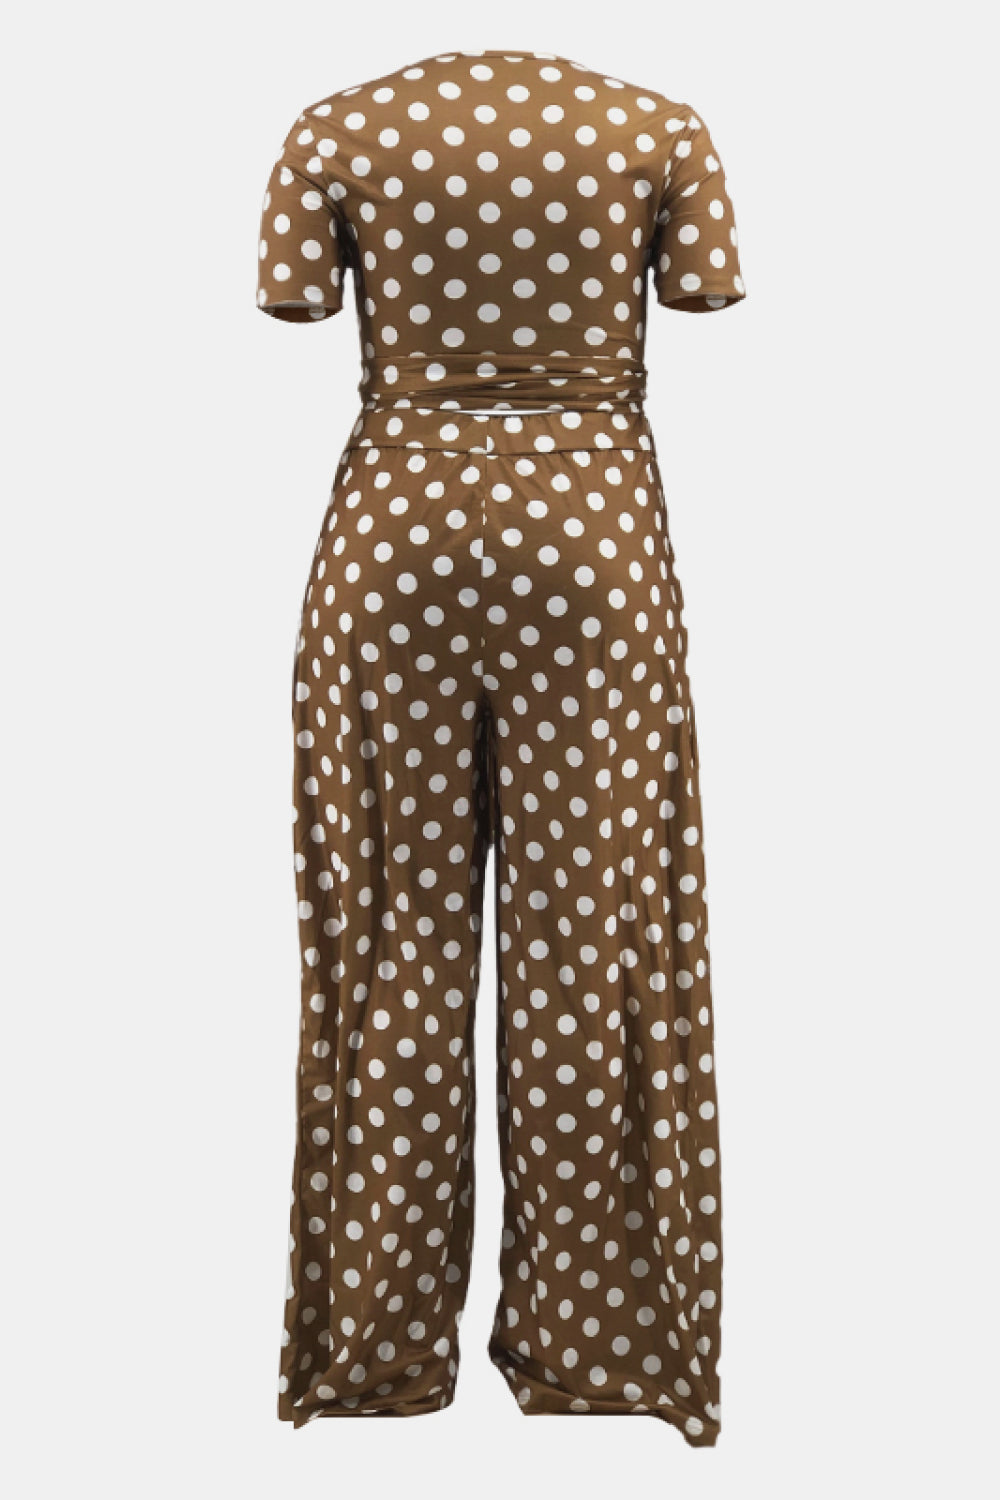 Plus Size Polka Dot Short Sleeve Top and Wide Leg Pants Set - Outlets Forever